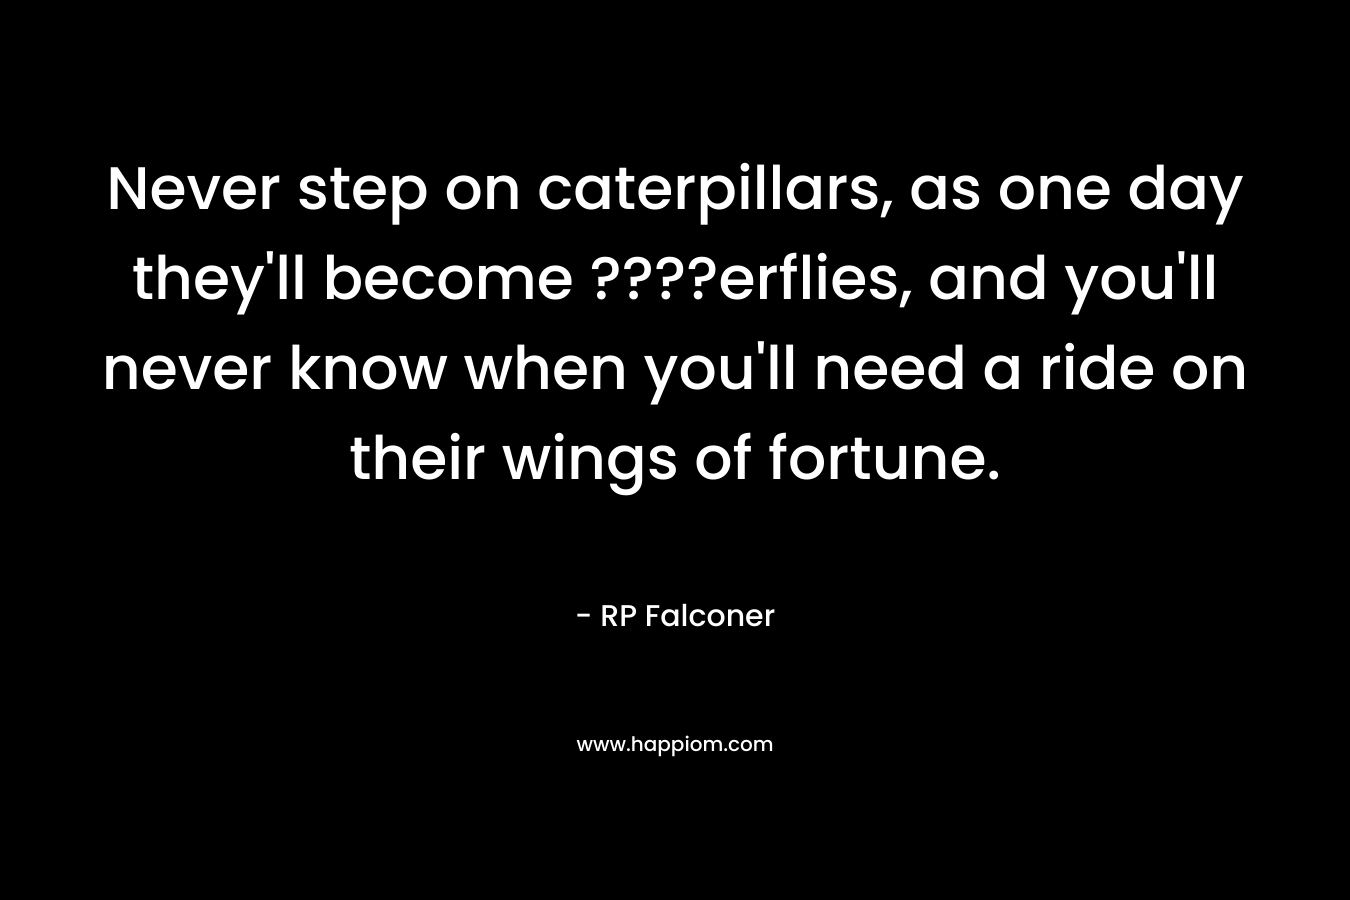 Never step on caterpillars, as one day they'll become ????erflies, and you'll never know when you'll need a ride on their wings of fortune.